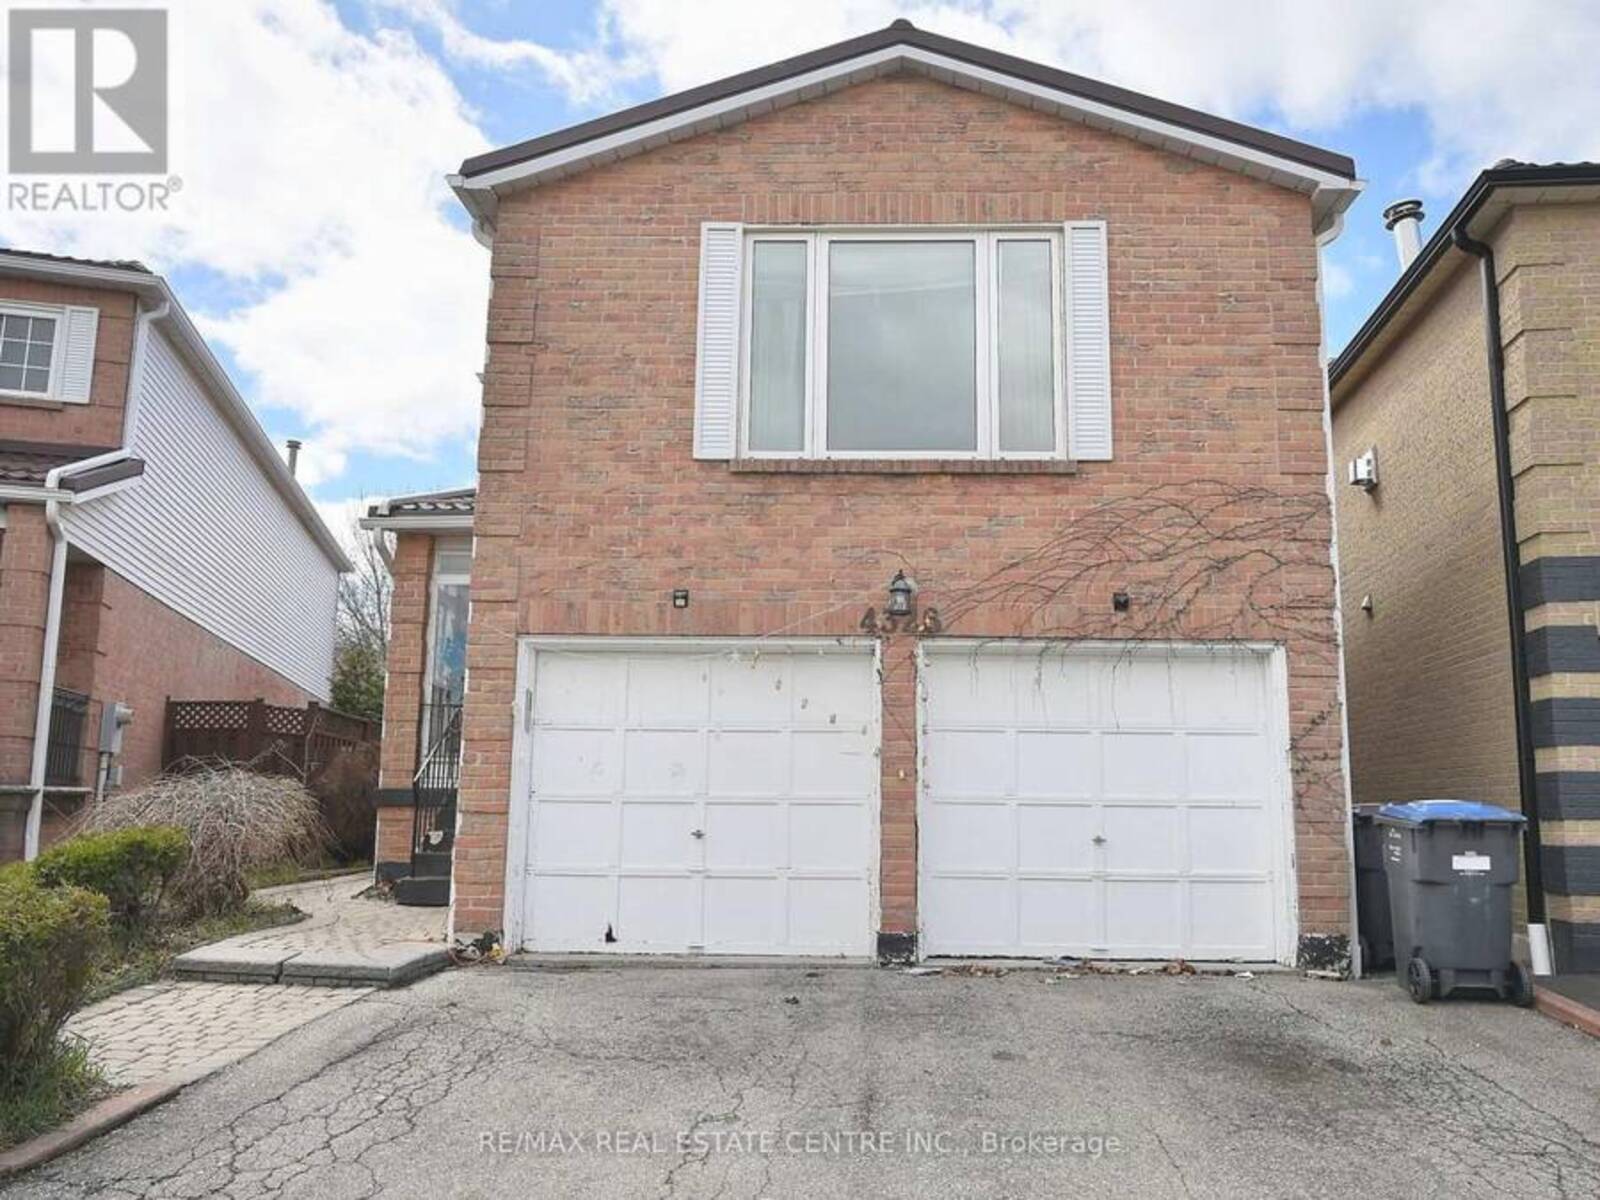 4326 WATERFORD CRES, Mississauga, Ontario L5R 2B2